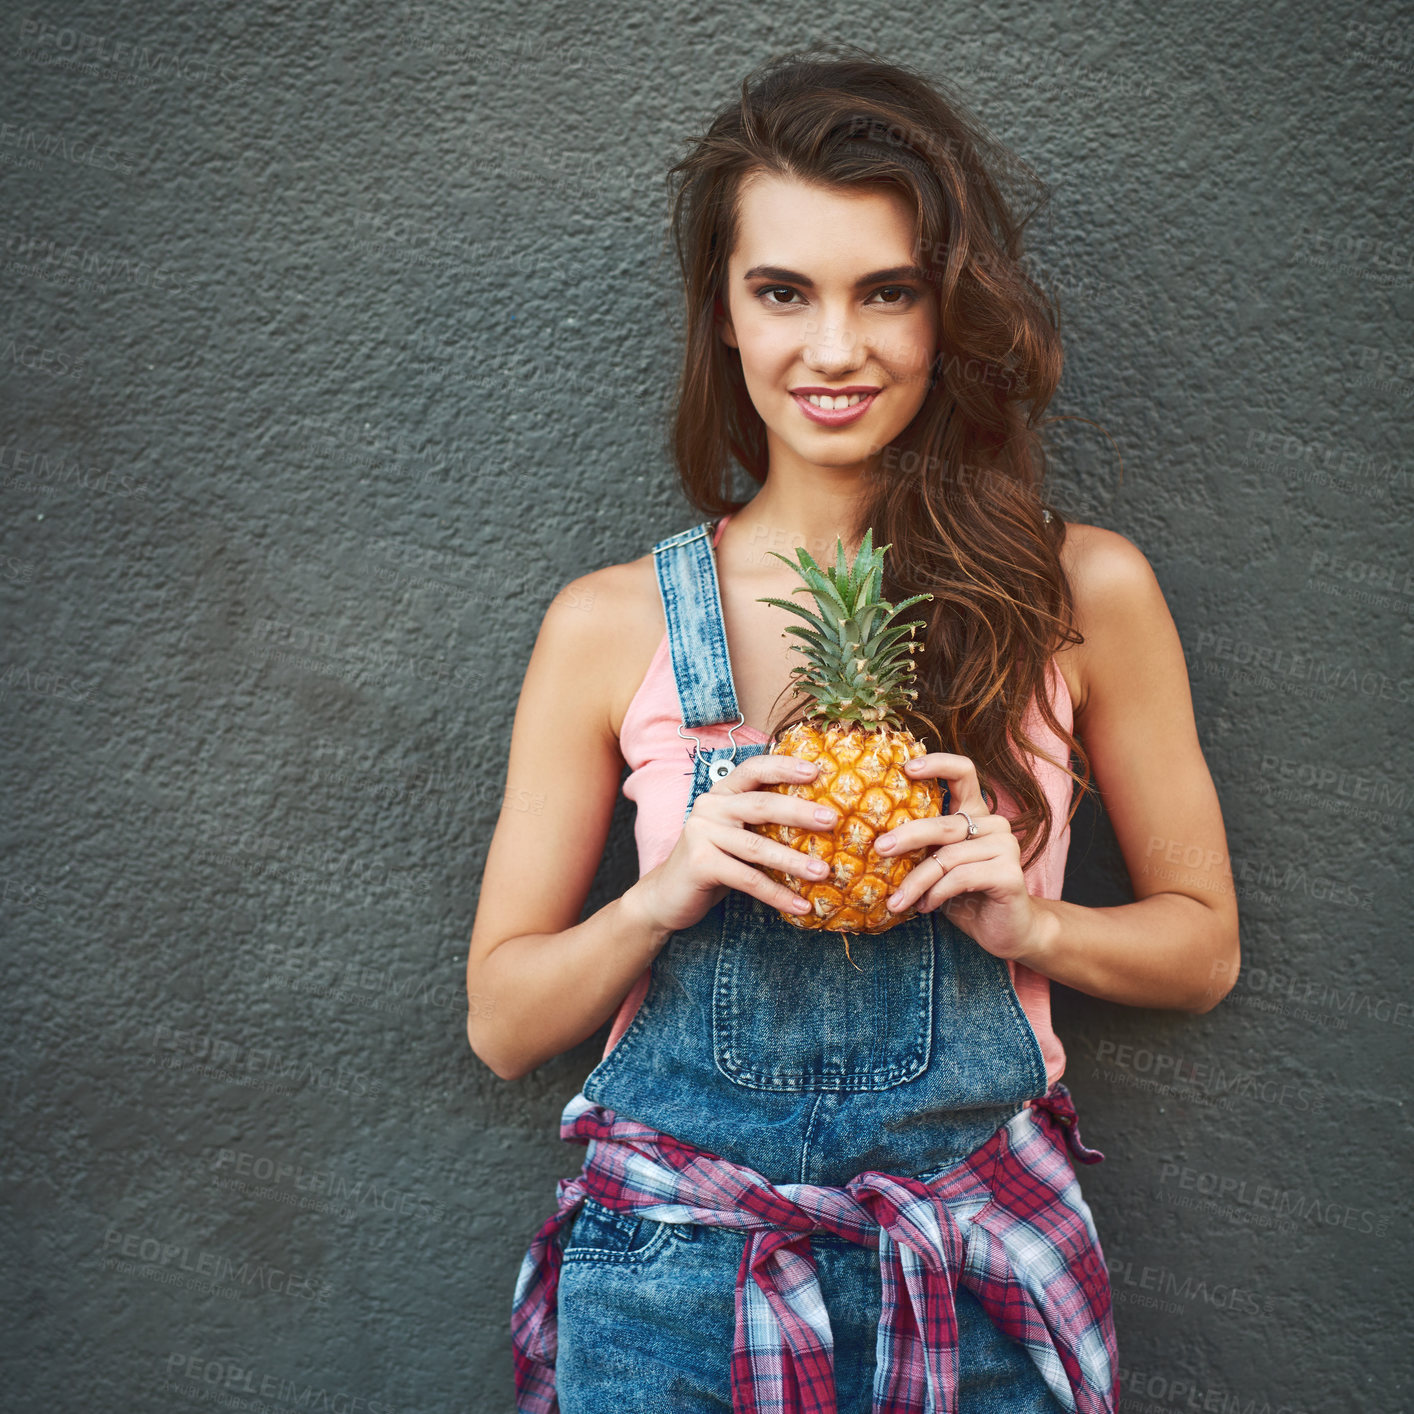 Buy stock photo Portrait of a cheerful young woman holding a pineapple while standing against a grey background